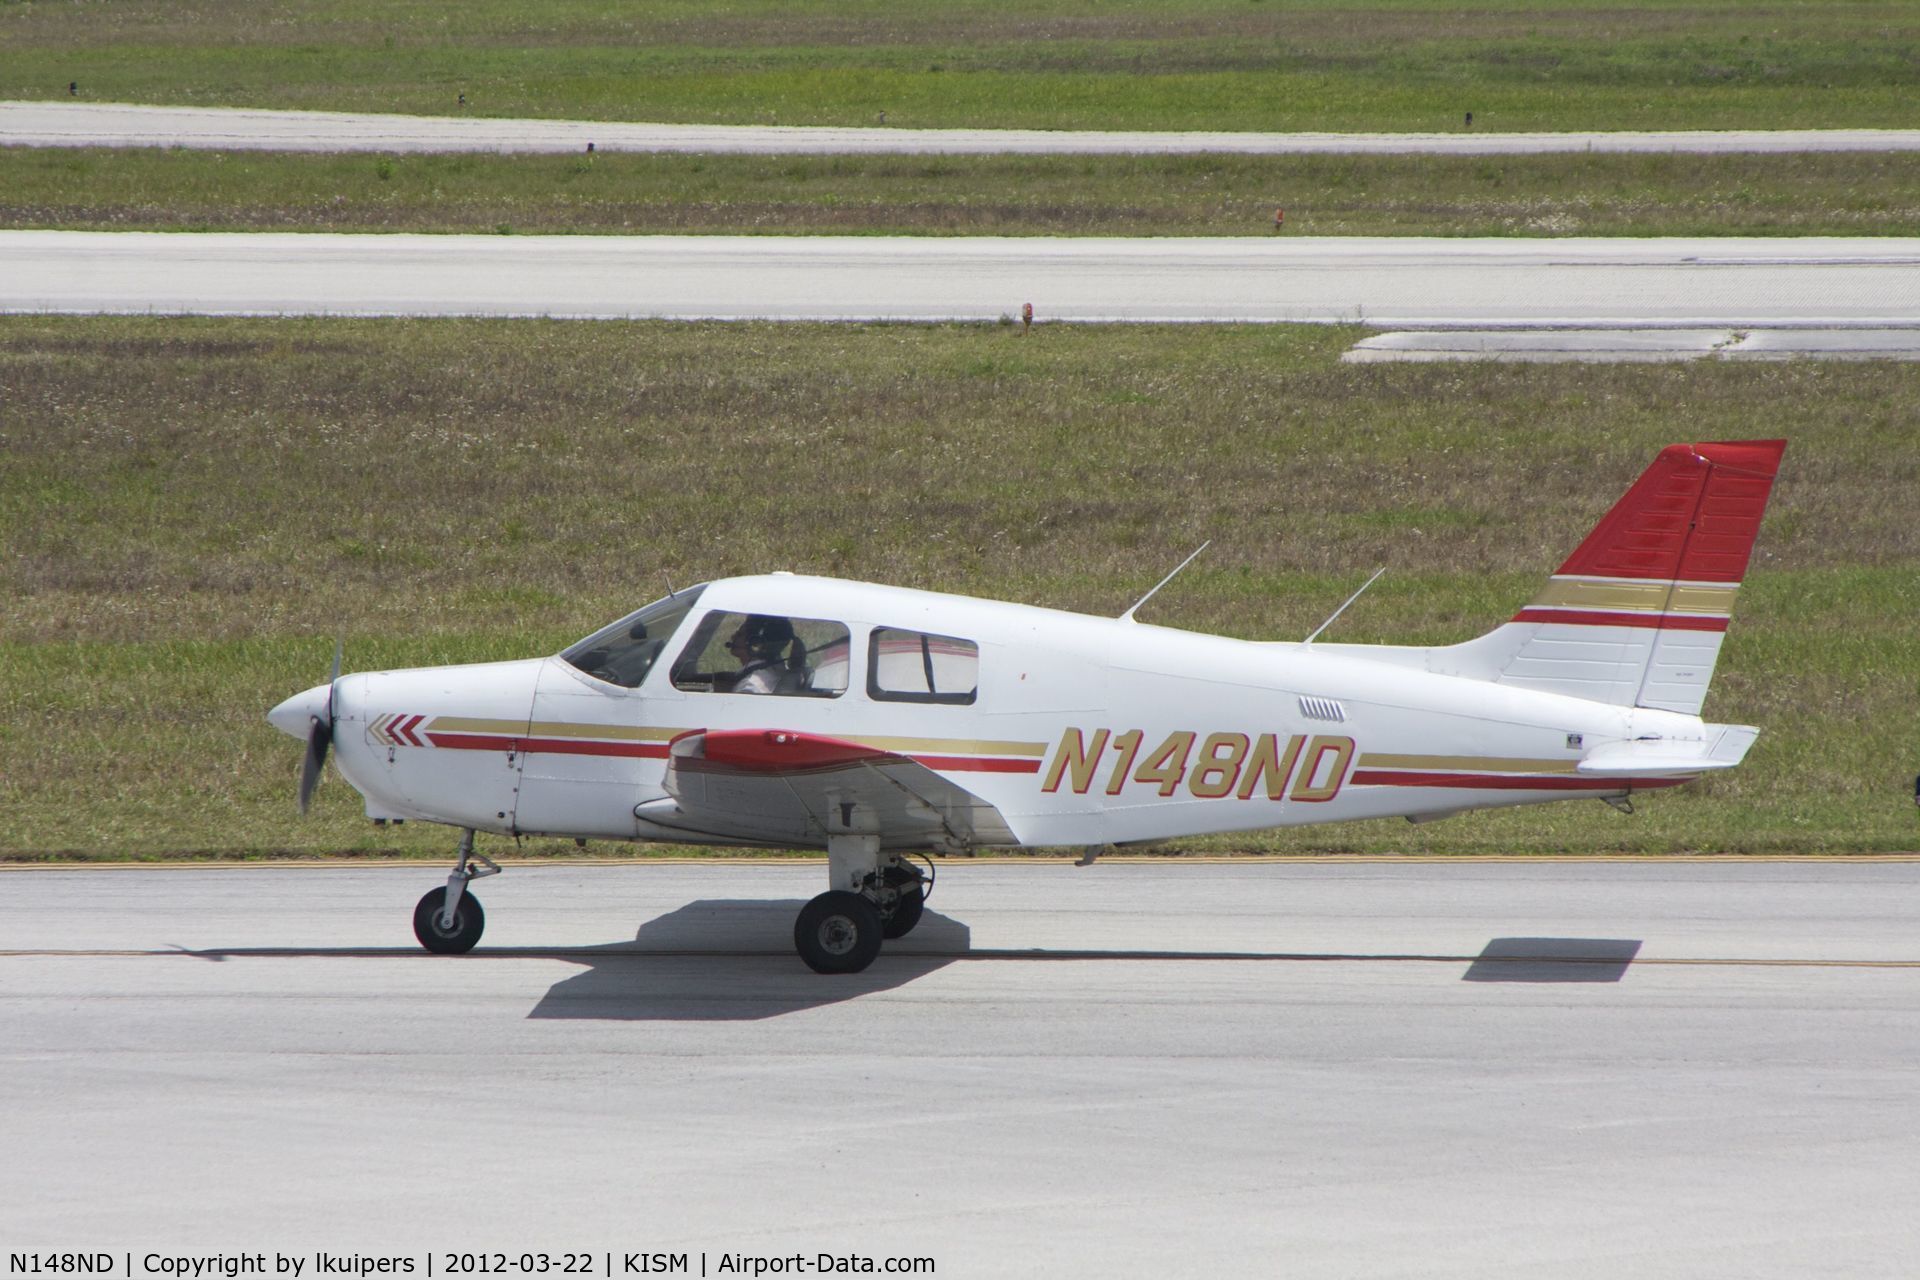 N148ND, 1992 Piper PA-28-161 C/N 2841338, At Kissimmee Airport